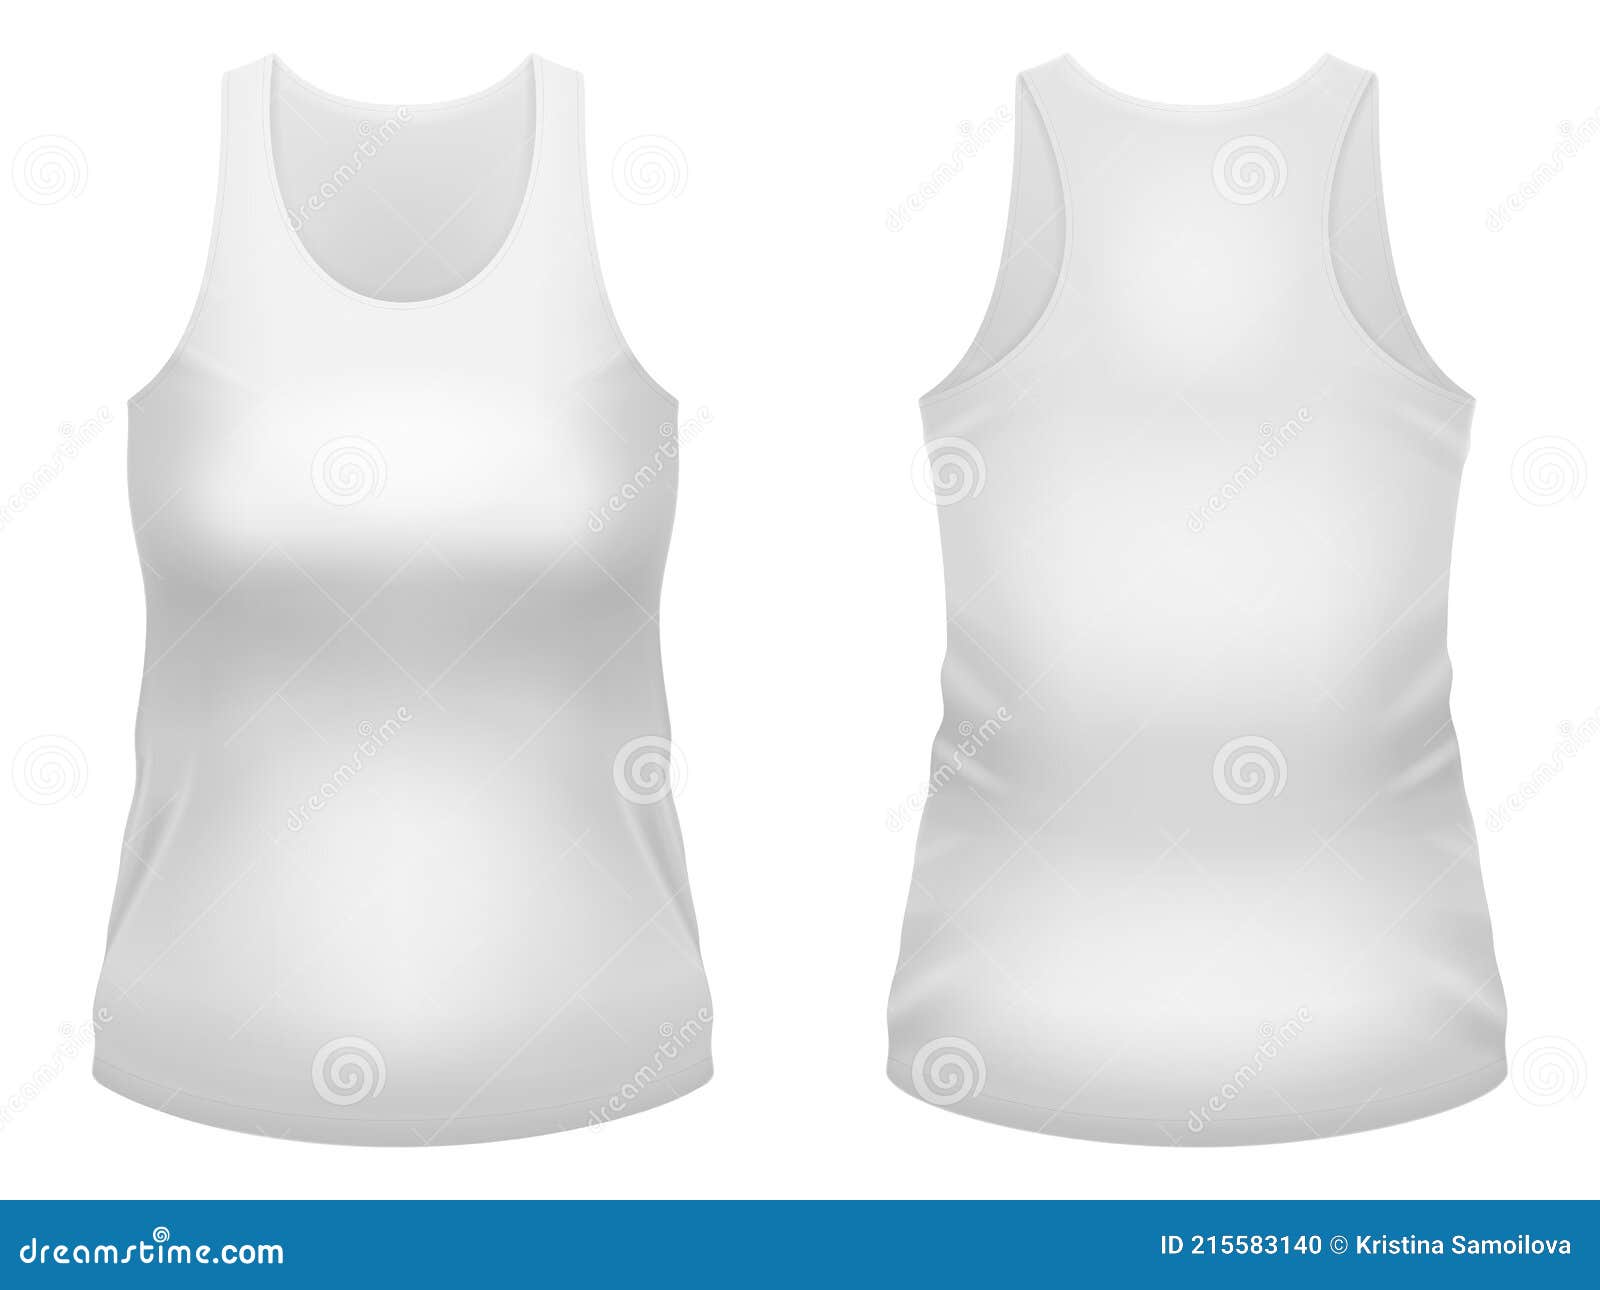 Blank White Tank Top Template. Front and Back Views. Vector